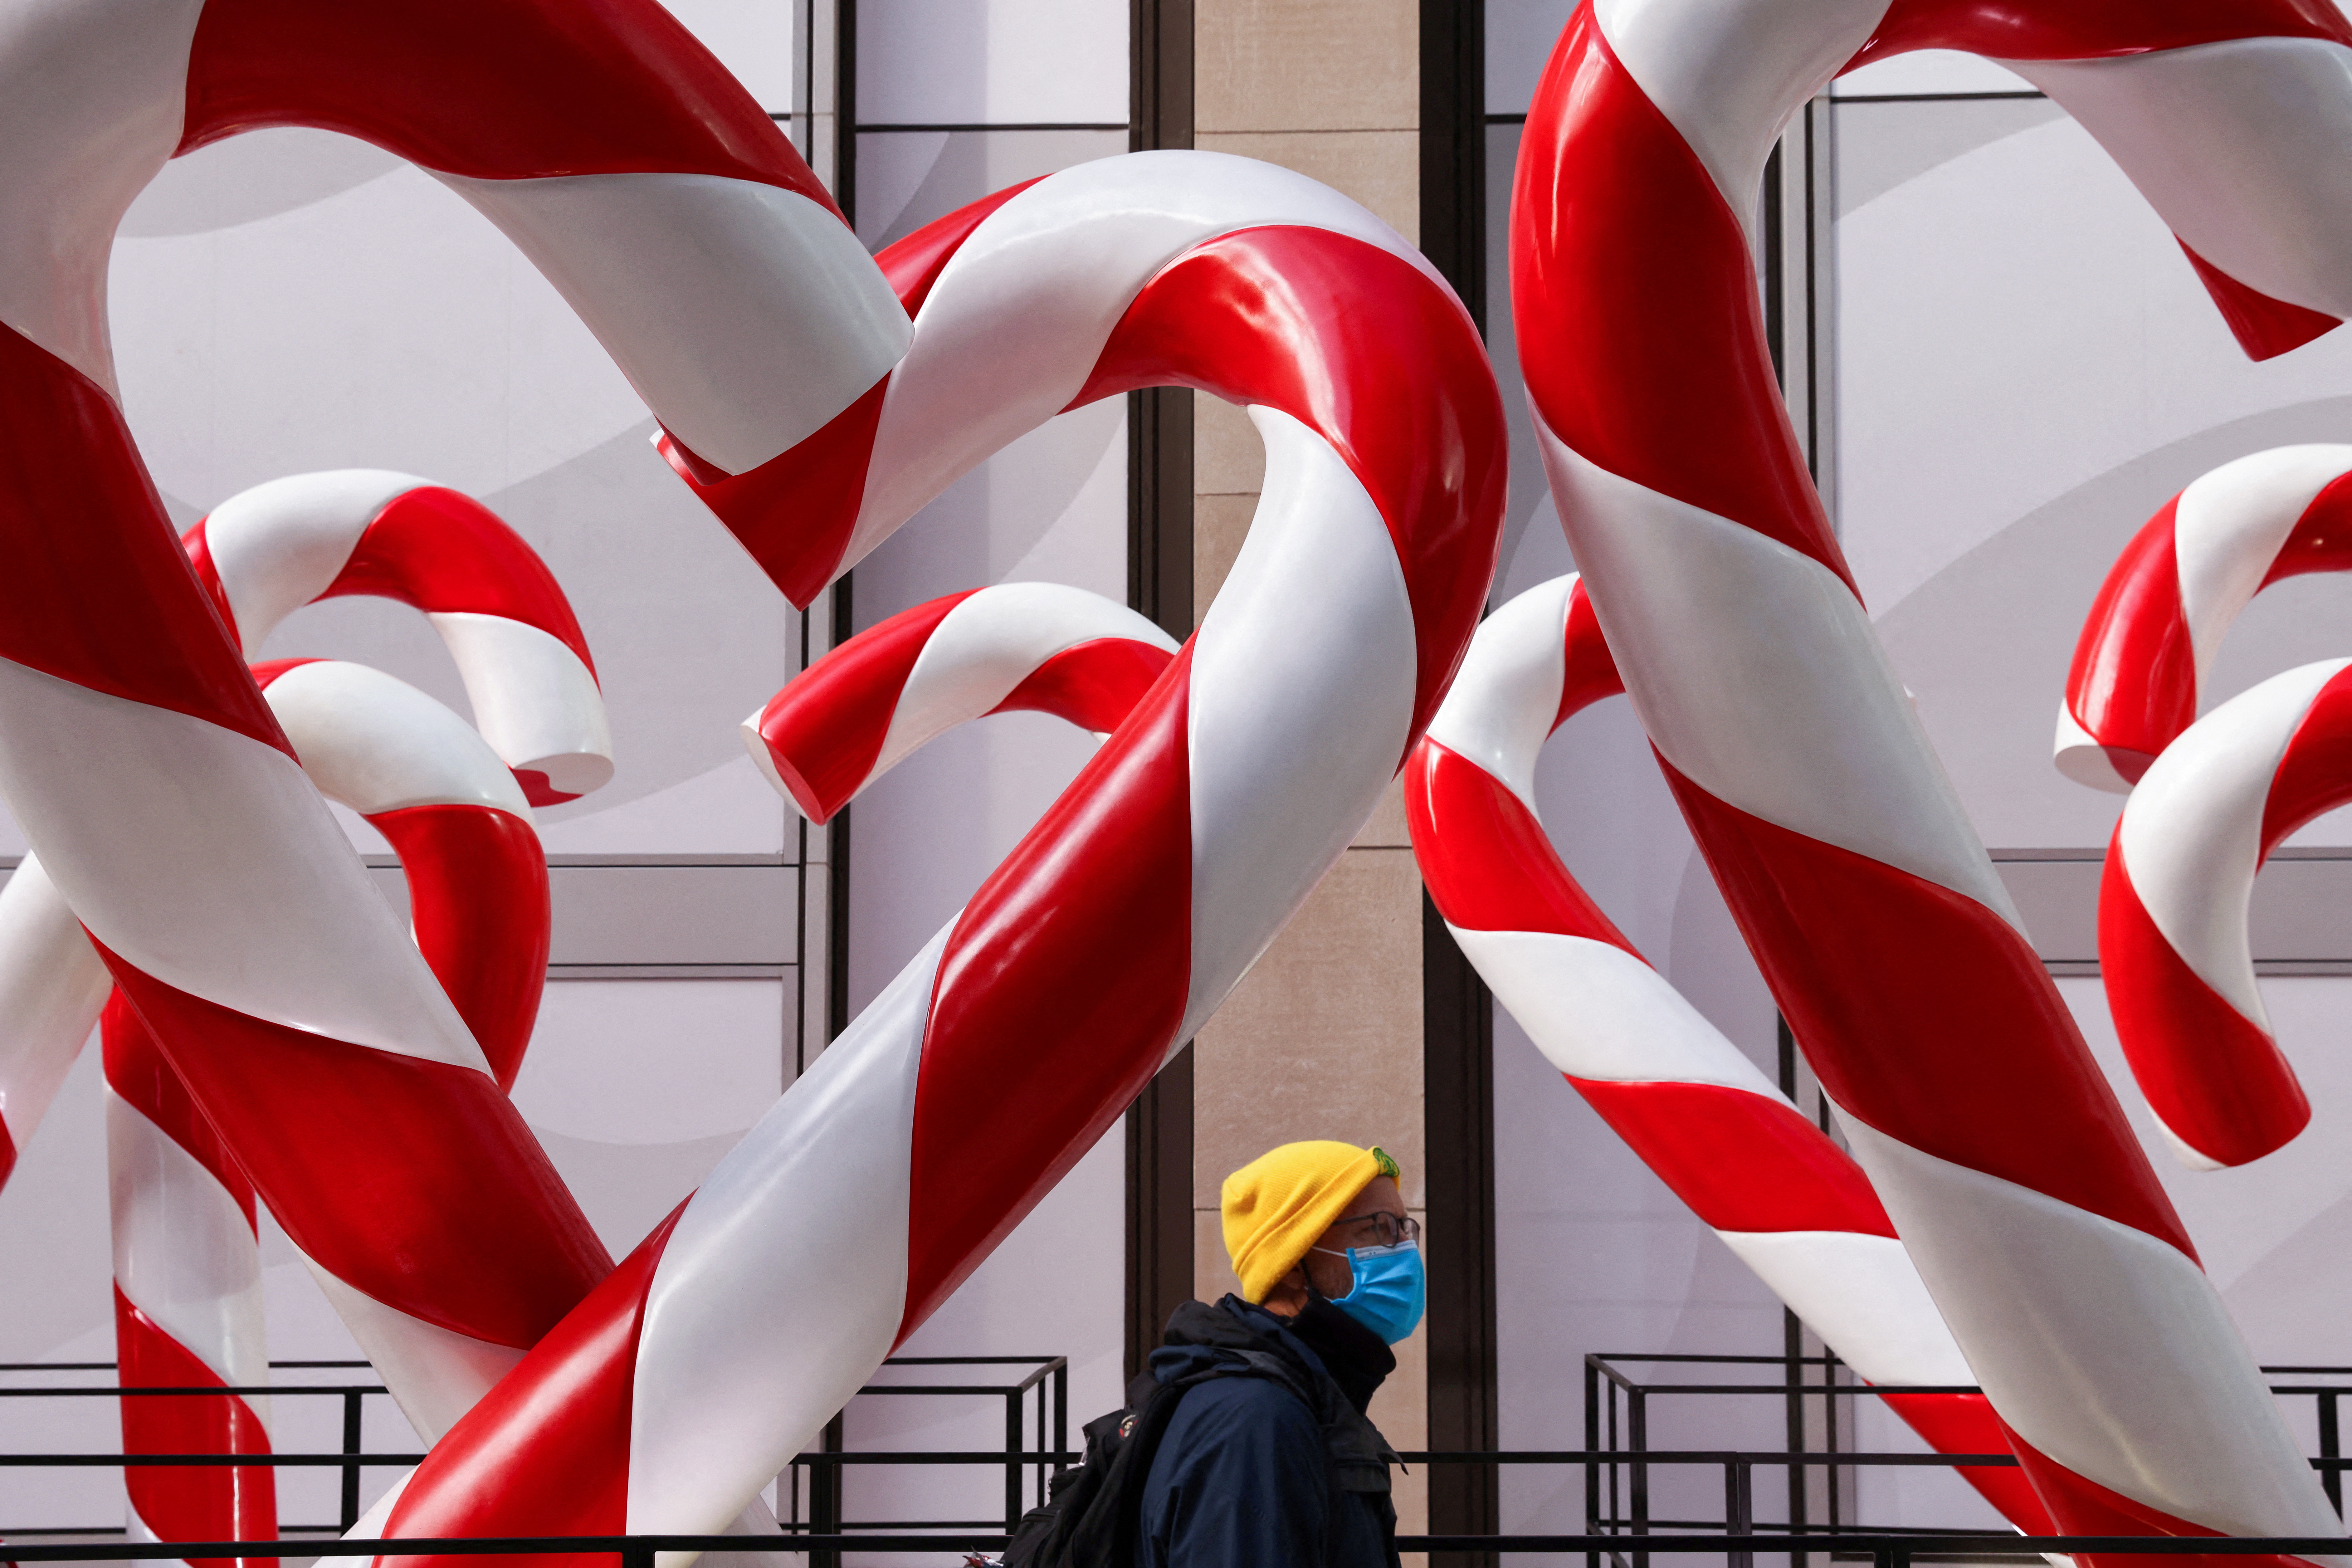 A person in a face mask walks by holiday decorations on Sixth Avenue as the Omicron coronavirus variant continues to spread in Manhattan, New York City